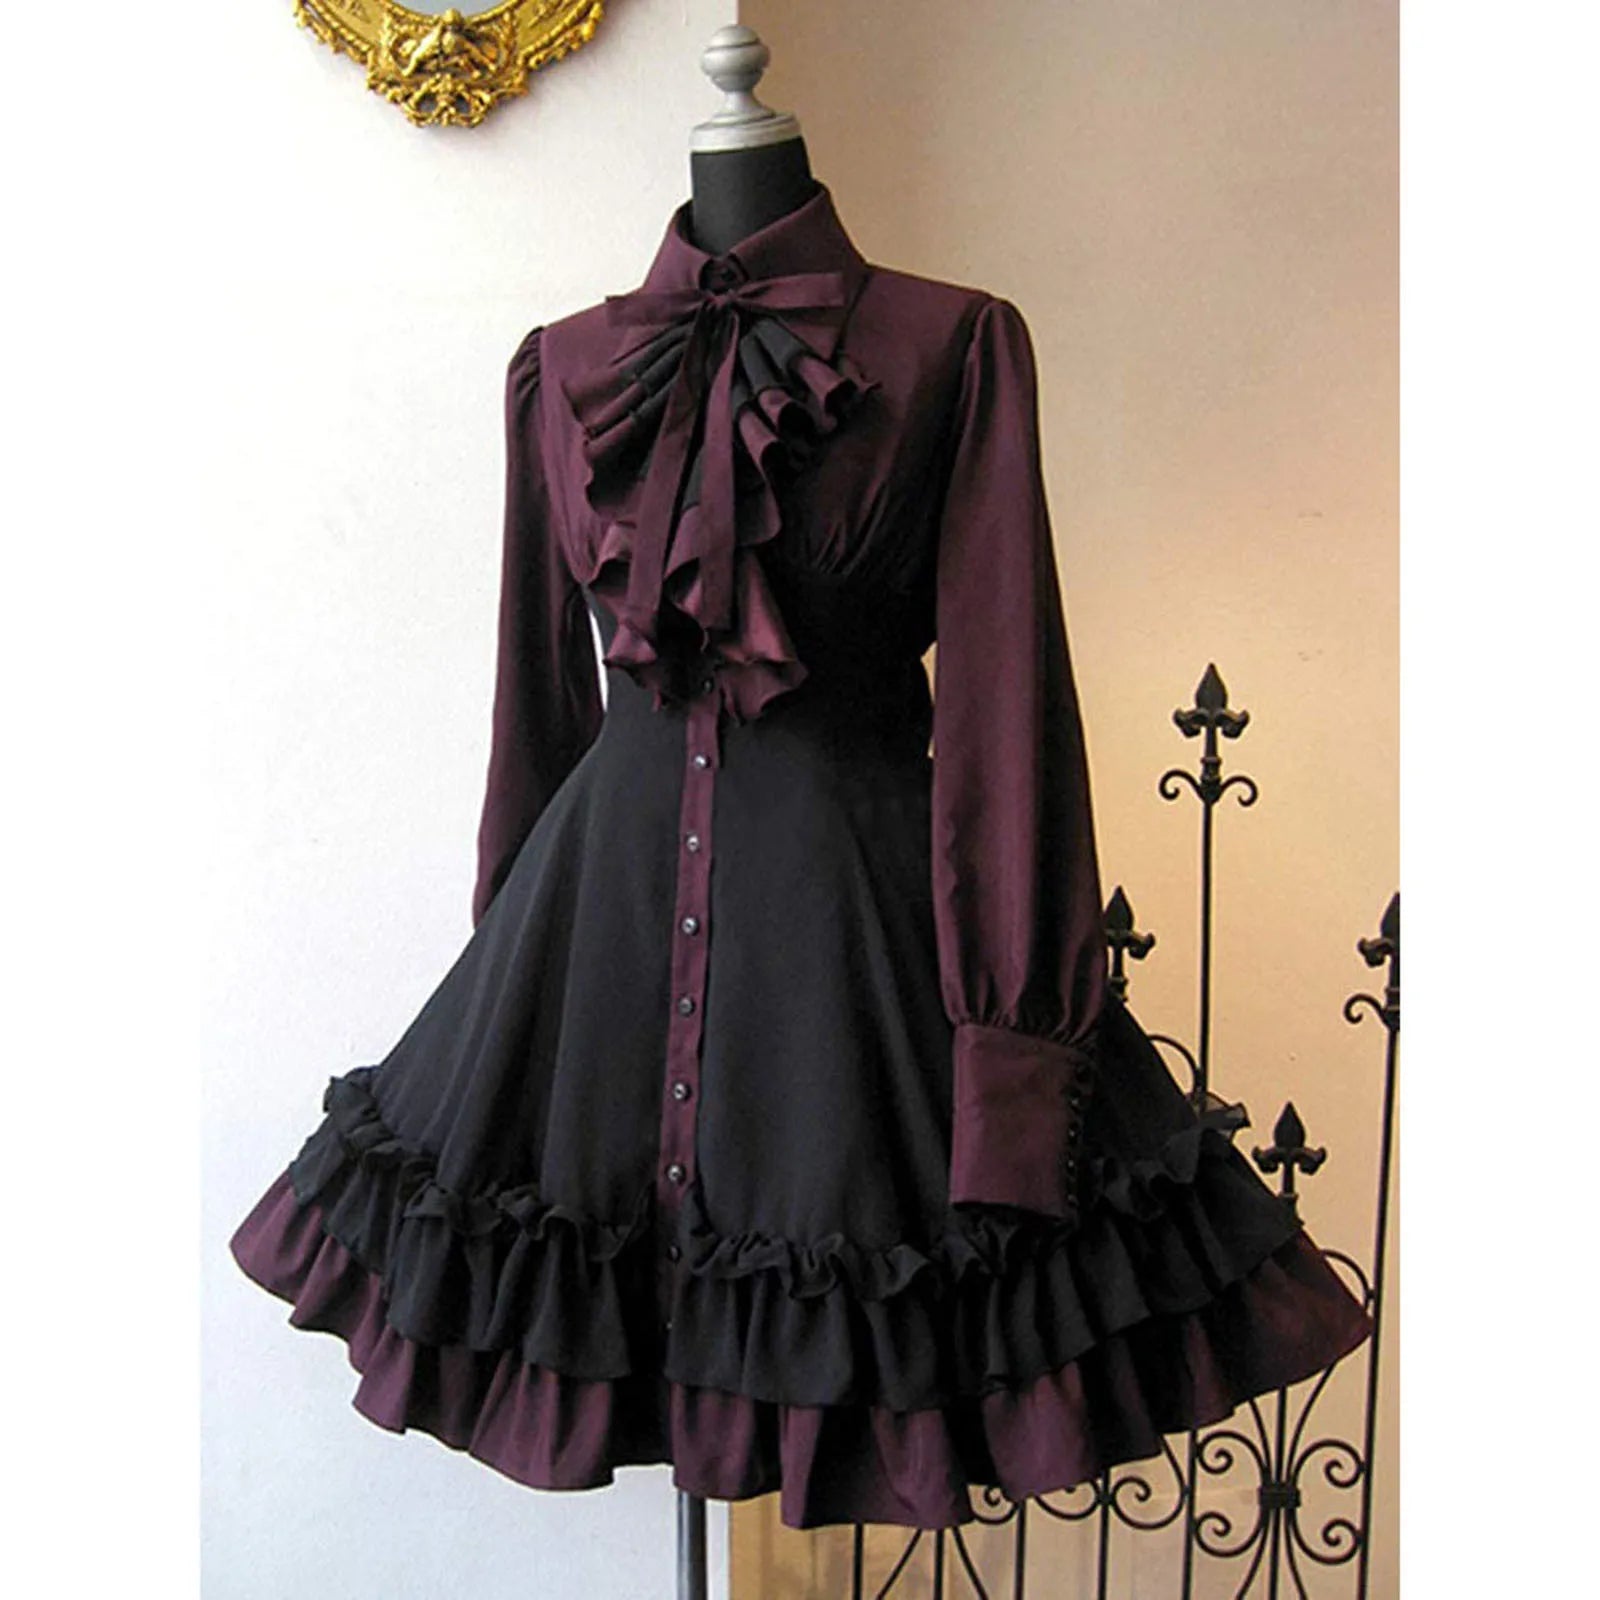 Autumn Elegant Gothic Lolita Dress - Pleated Lace-Up - Kawaii Stop - Autumn Fashion, Cosplay, Costume, Elegant, Gothic Lolita Dress, Irregular Length, Mainland China, Pleated Lace-Up, Polyester, Sophisticated Style, Women's Fashion